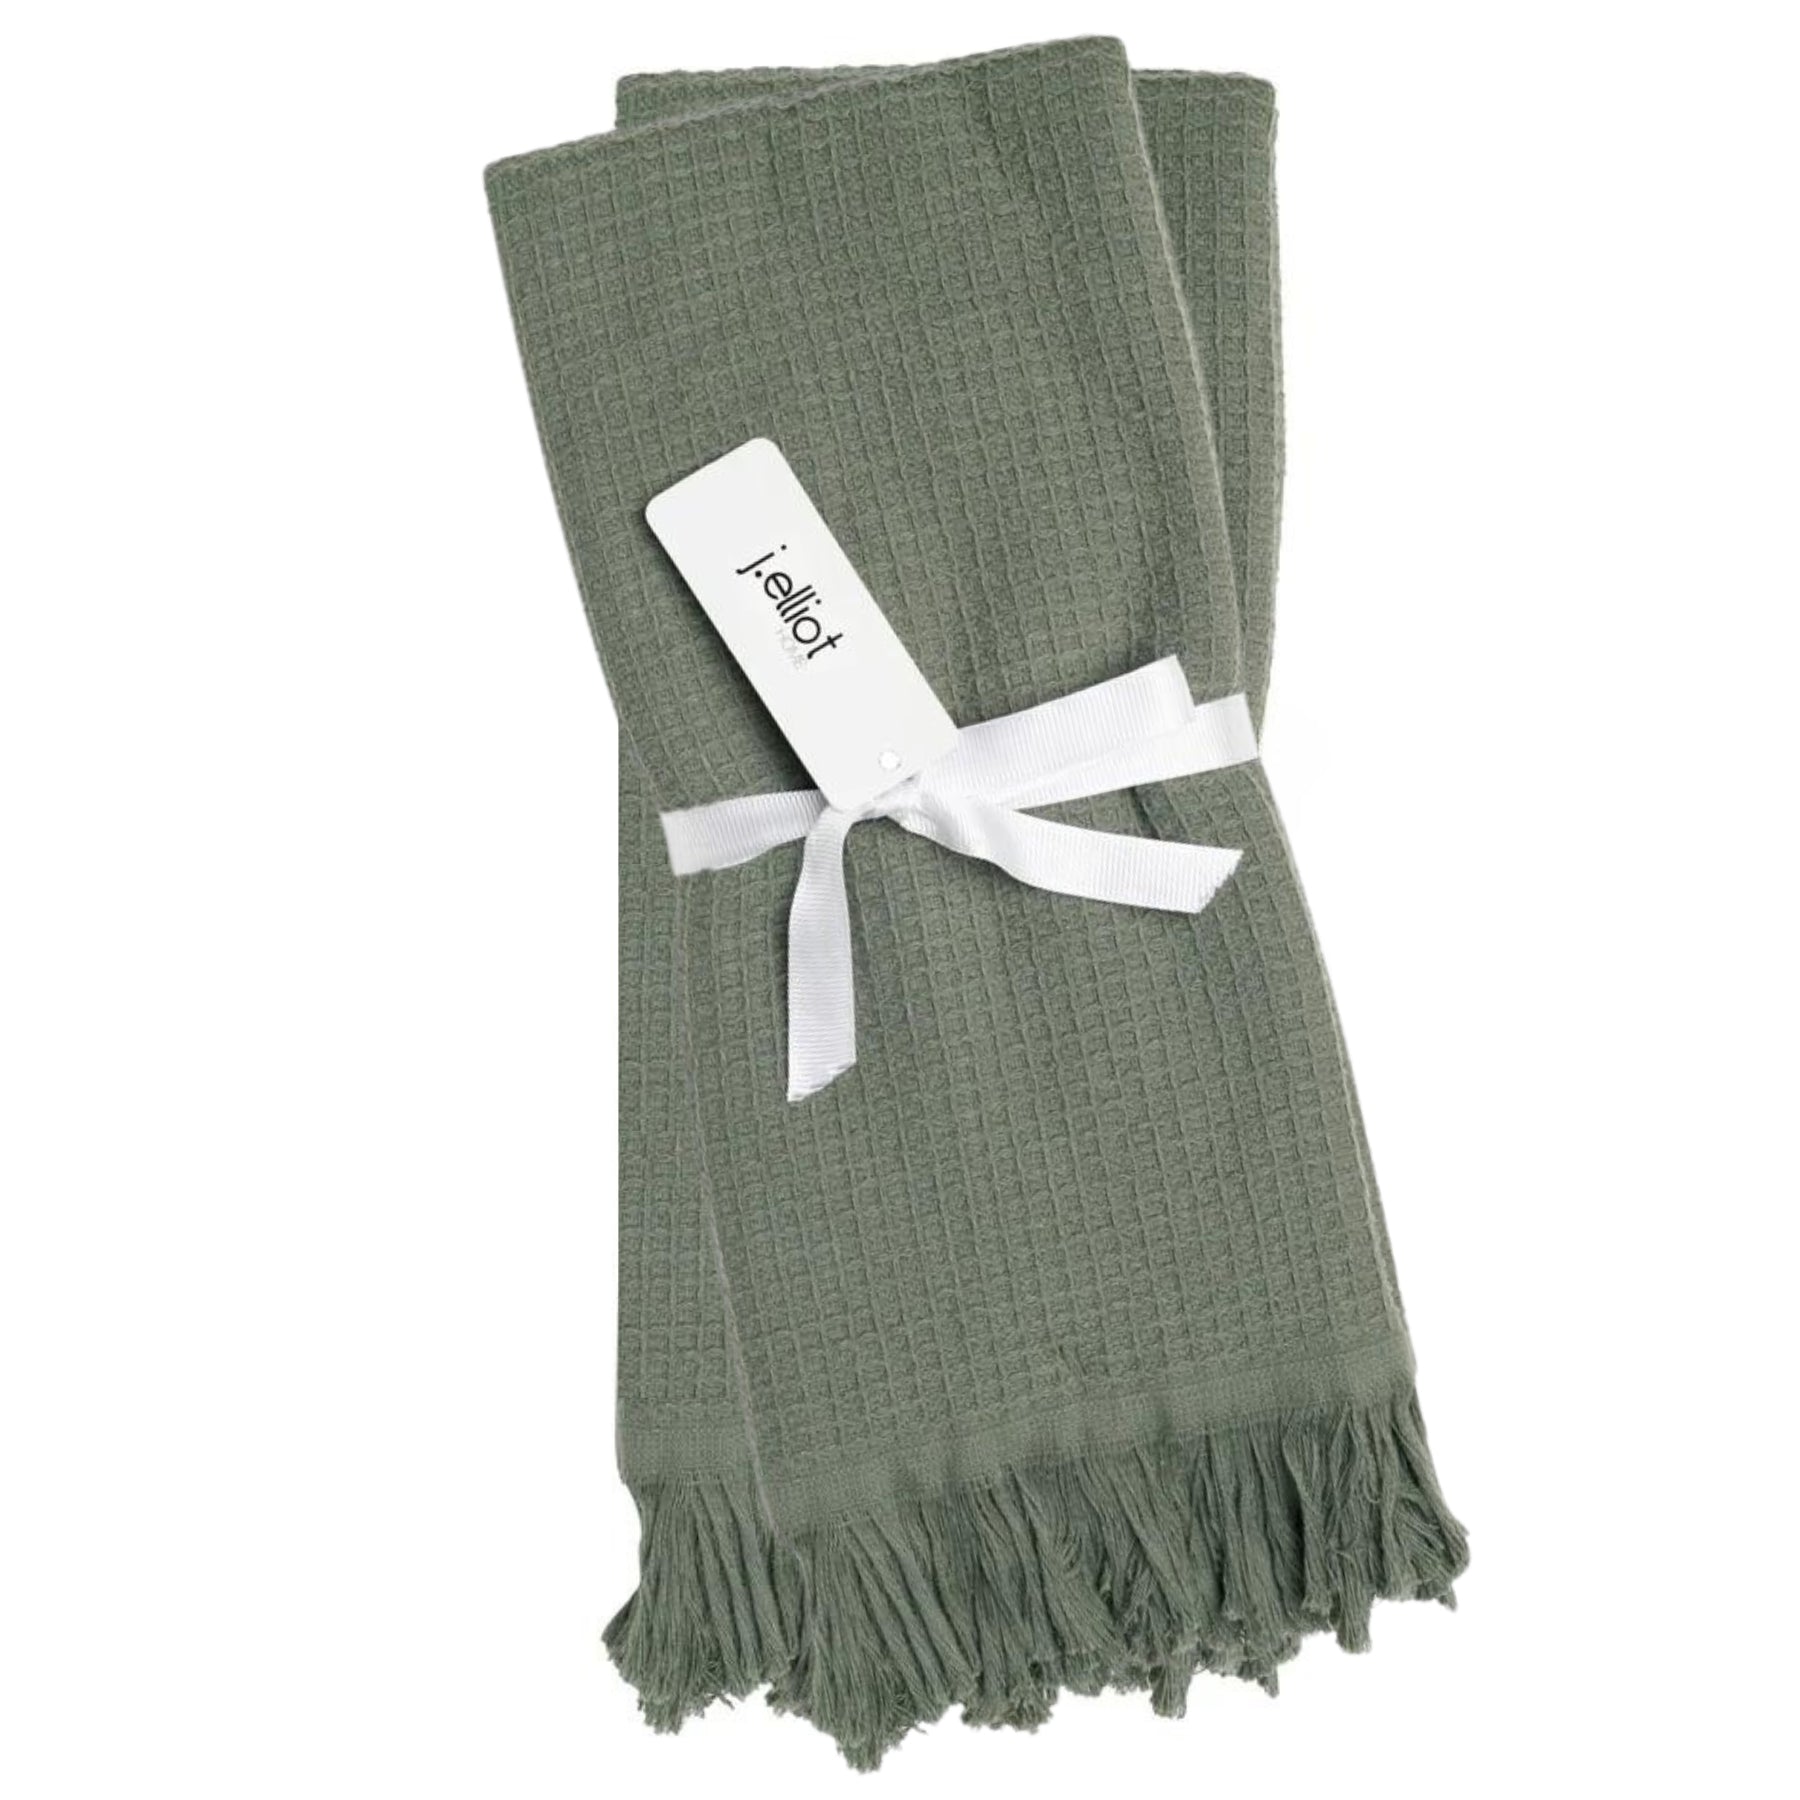 Neatly folded and tied with ribbon Camila Cotton Waffle Hand Towels in Chive, presenting a deep green hue and fringe detail for a natural, organic feel.